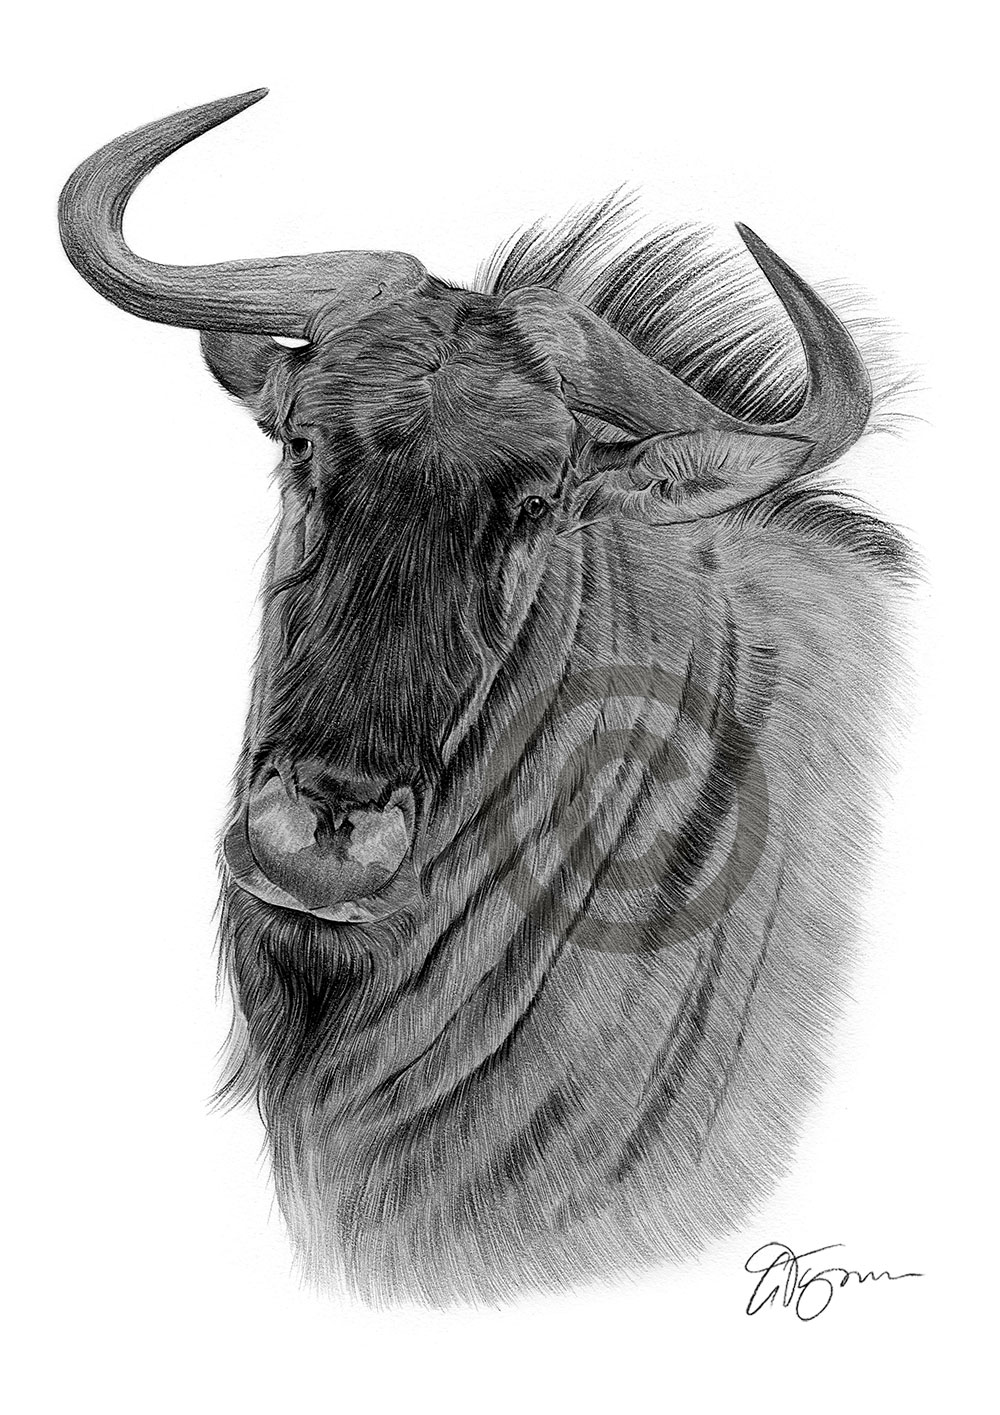 Pencil drawing of a wilderbeest by artist Gary Tymon